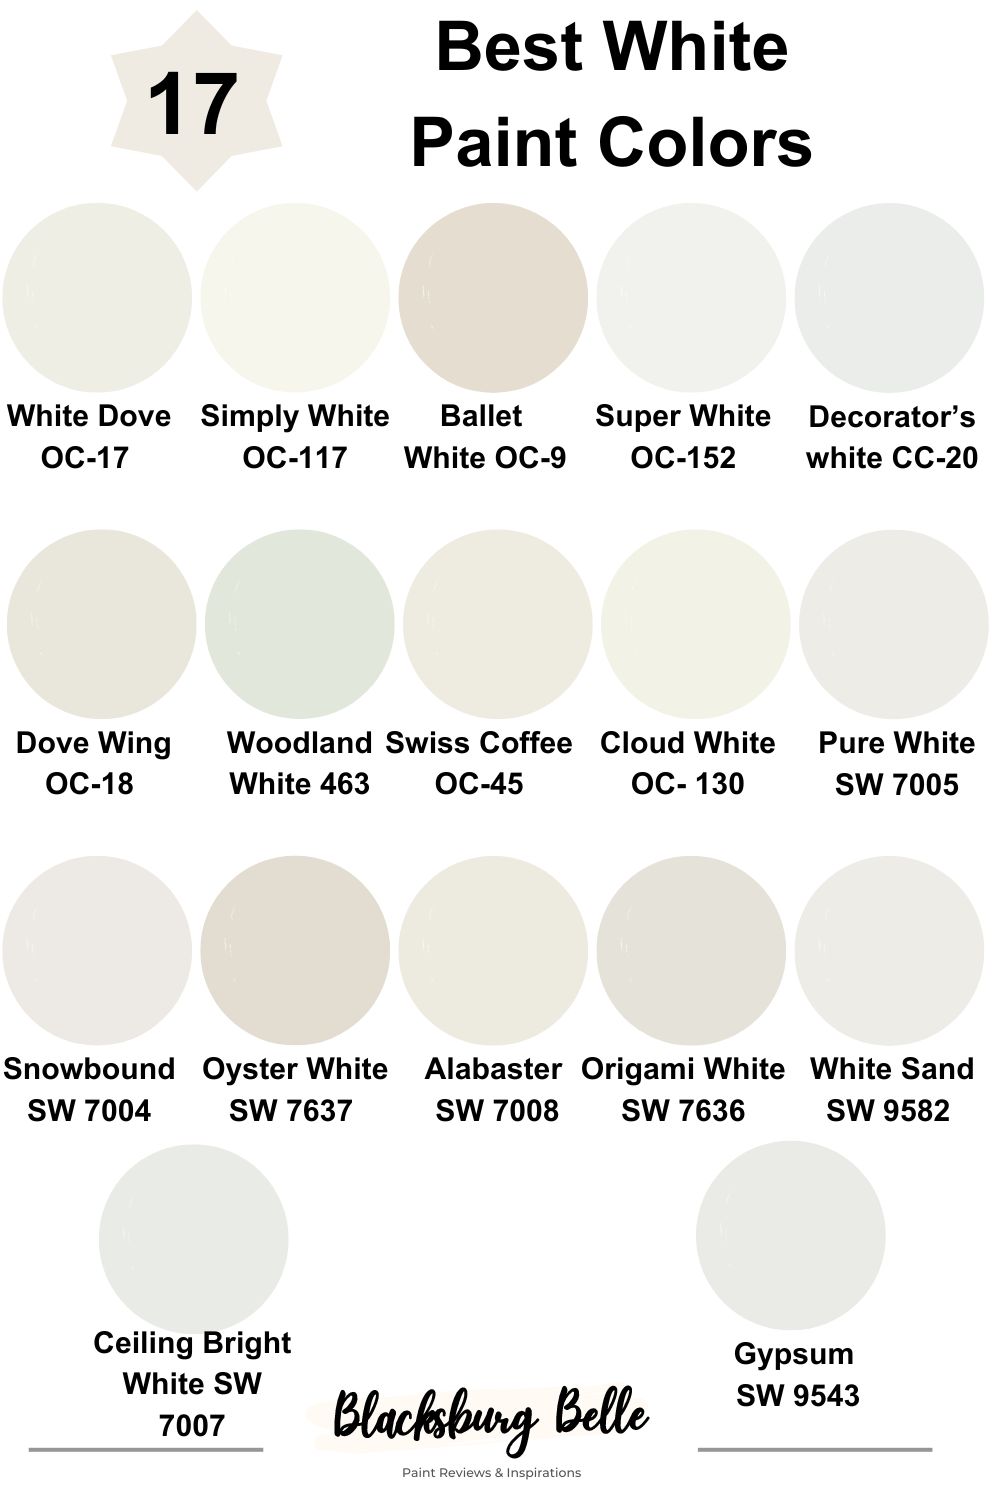 17 Best White Paint Colors For Interior Walls